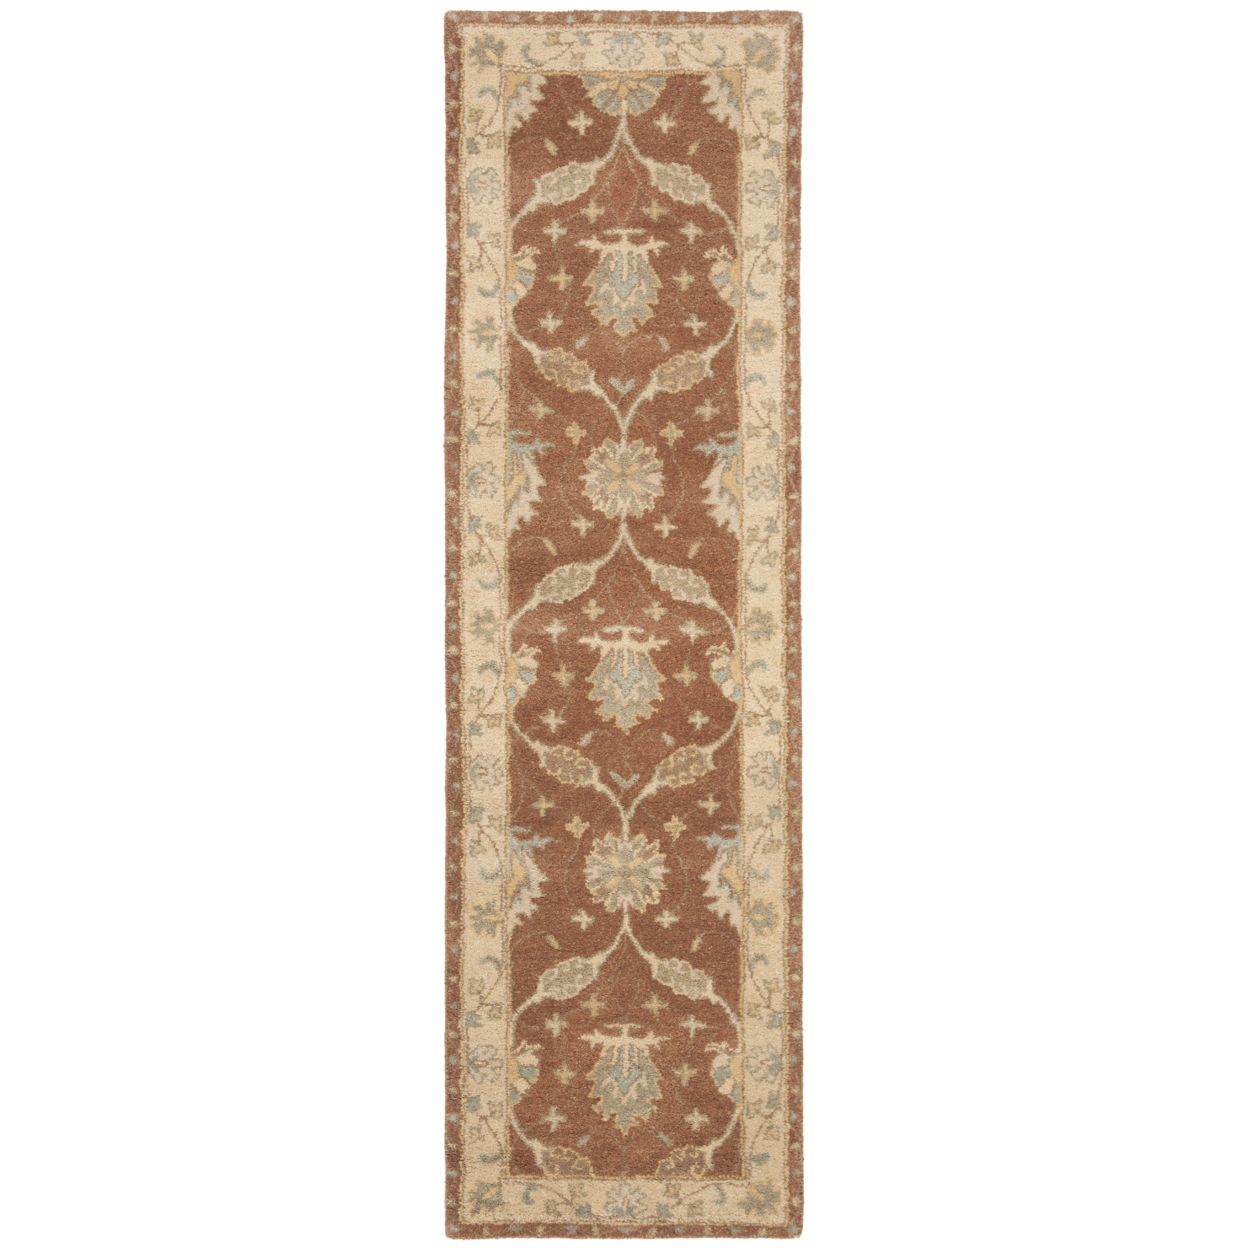 SAFAVIEH Antiquity AT315A Handmade Brown / Taupe Rug - 2' X 3'